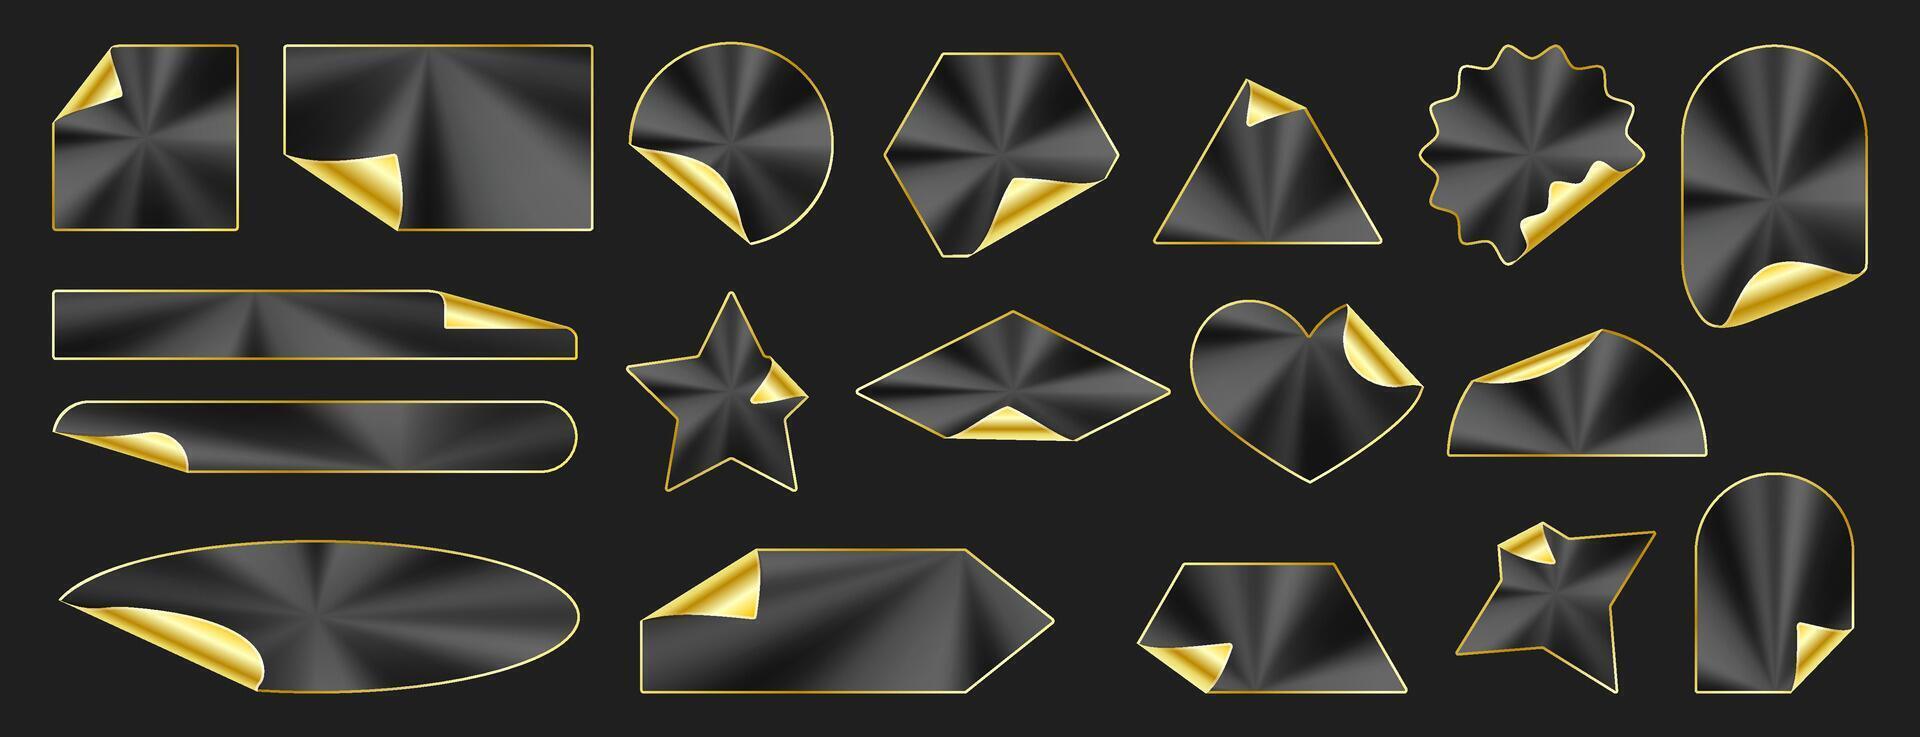 Set of black and gold stickers. Vector holographic geometric shapes with gold frame and curled corner. Luxury, premium golden labels. Isolated background